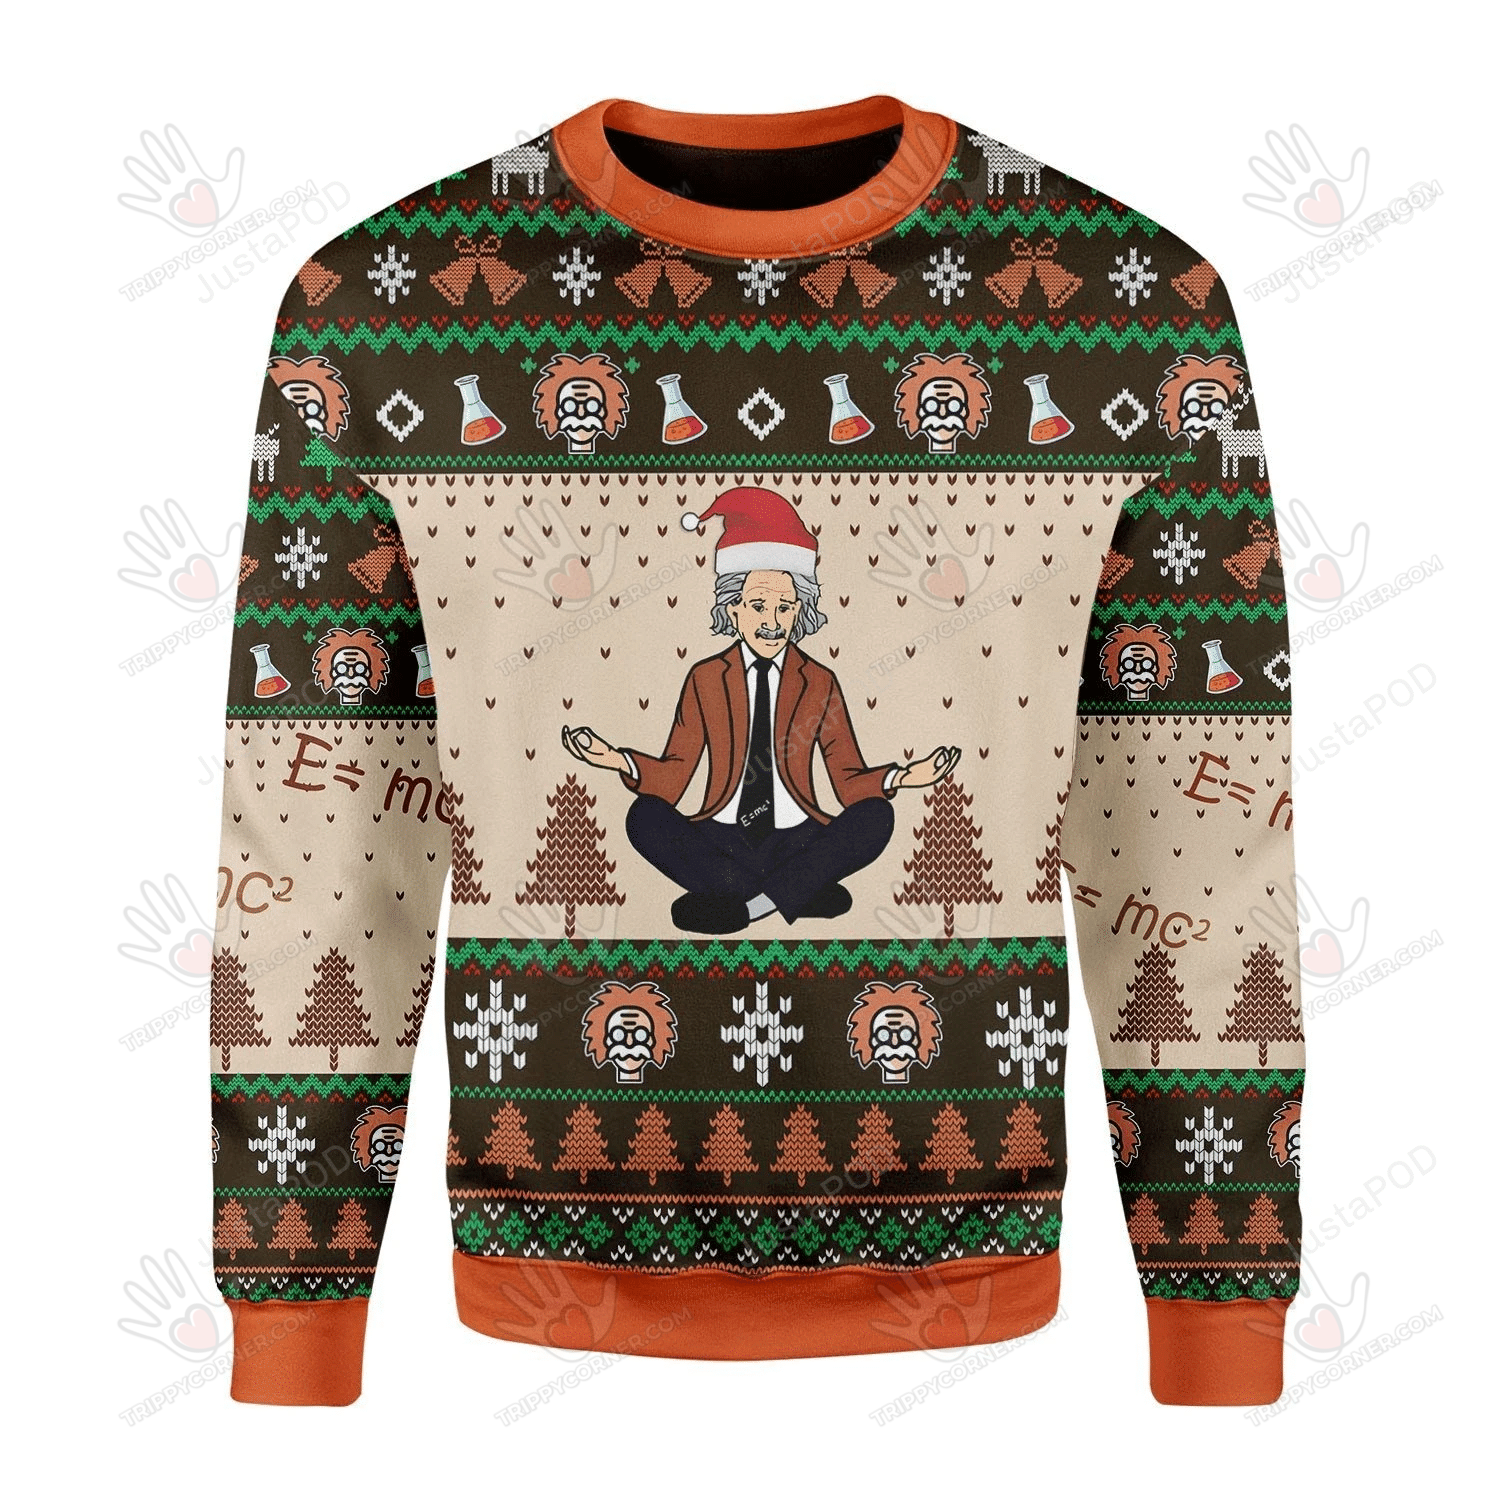 Einstein Doing Yoga Ugly Christmas Sweater, All Over Print, Ugly Ugly Sweater Christmas Gift